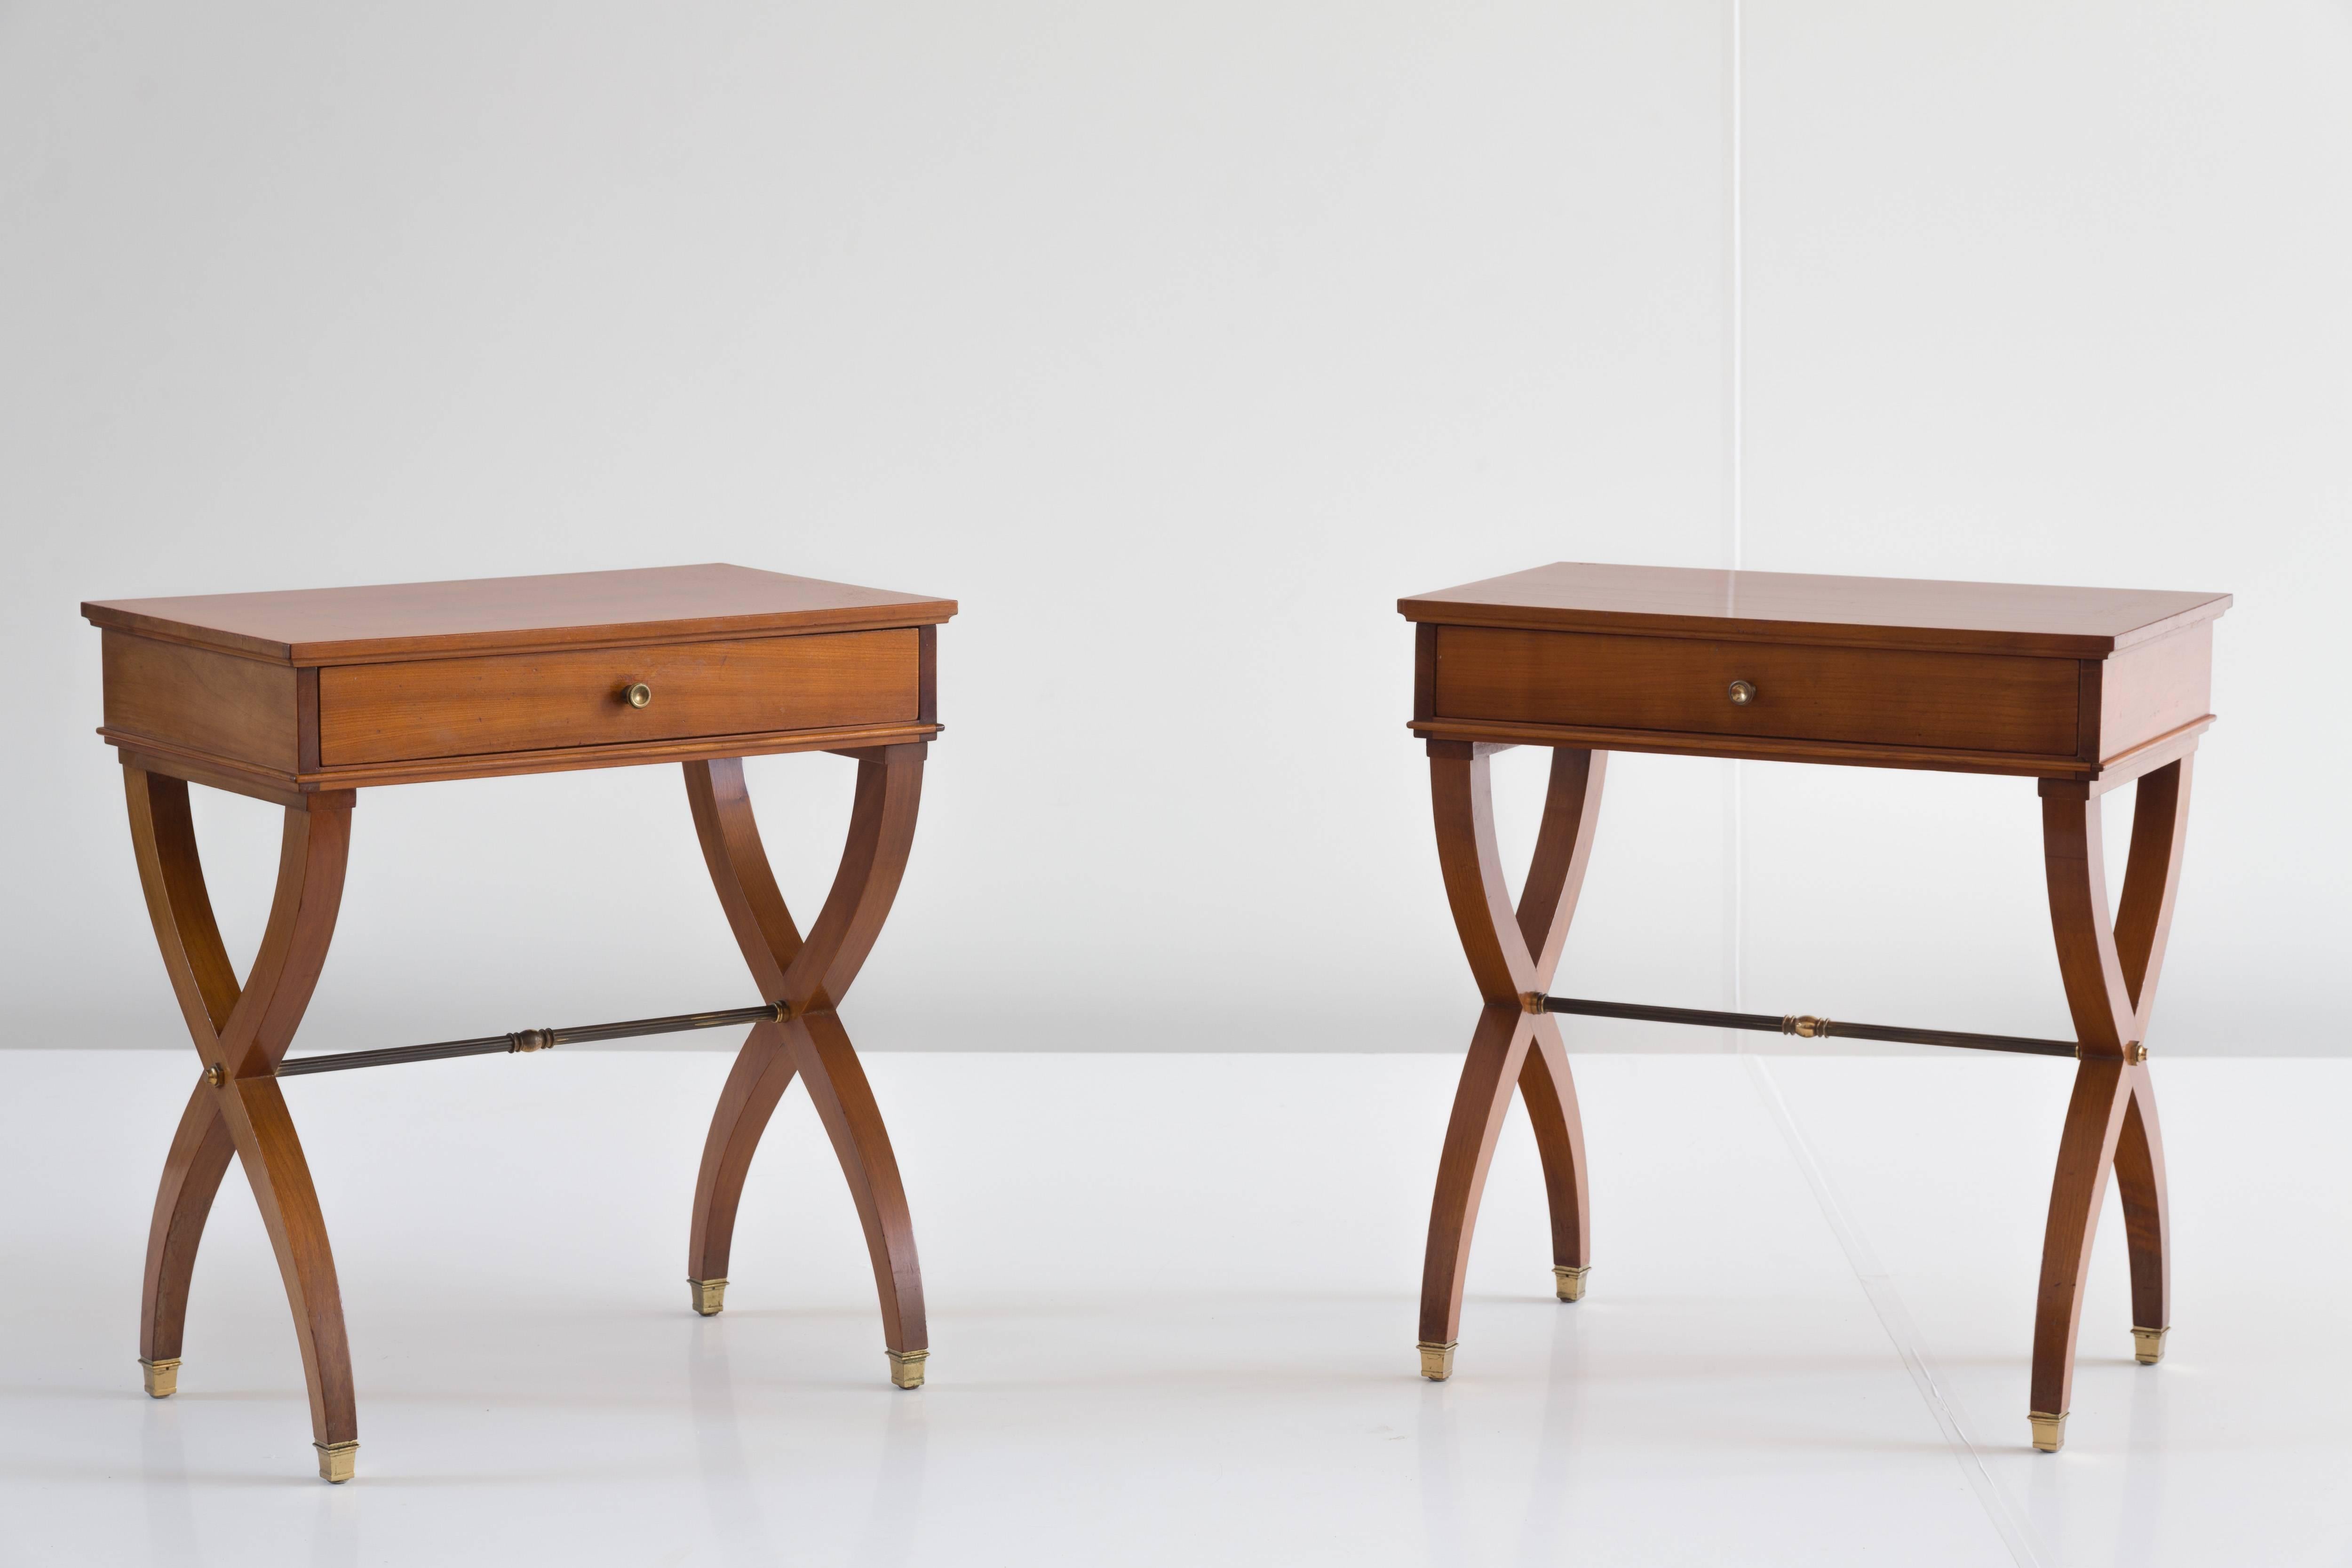 Rare pair of nightstand designed by Paolo Buffa, 1950.
Executed by Serafino Arrighi.
Caucasian walnut, brass.
Stylish 